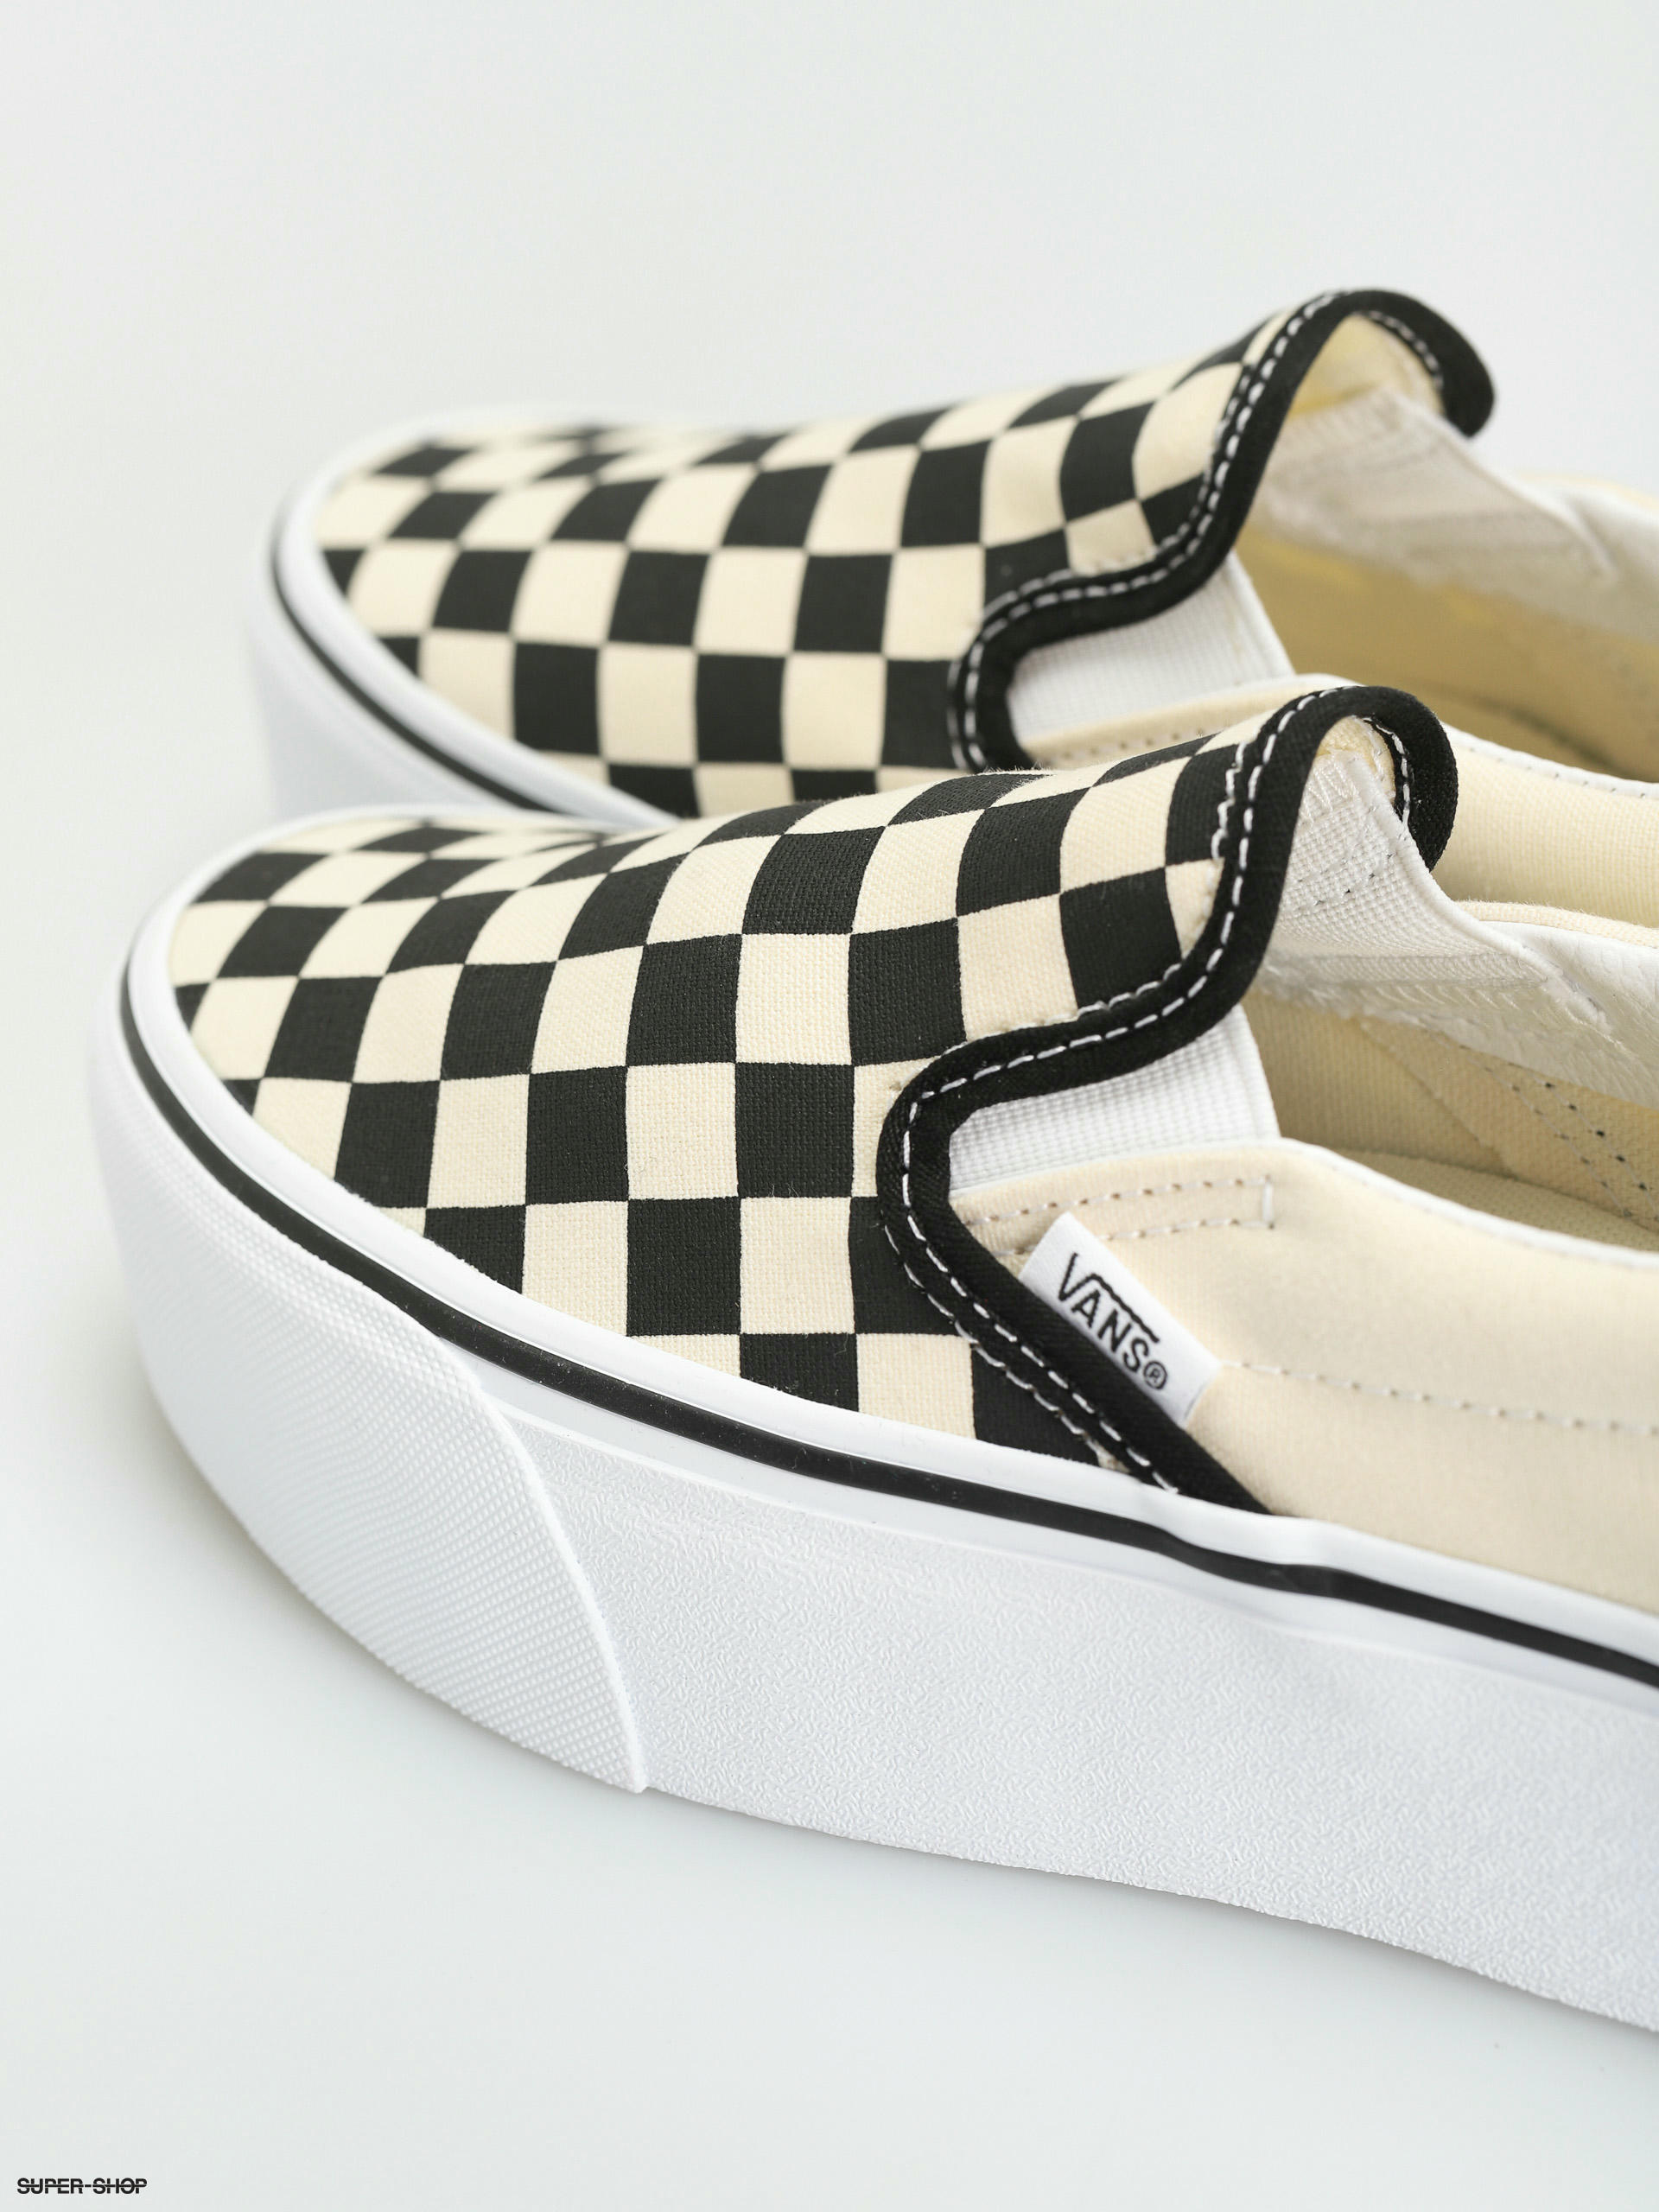 Vans Classic Slip On Stackform Shoes (checkerboard black/classic white)